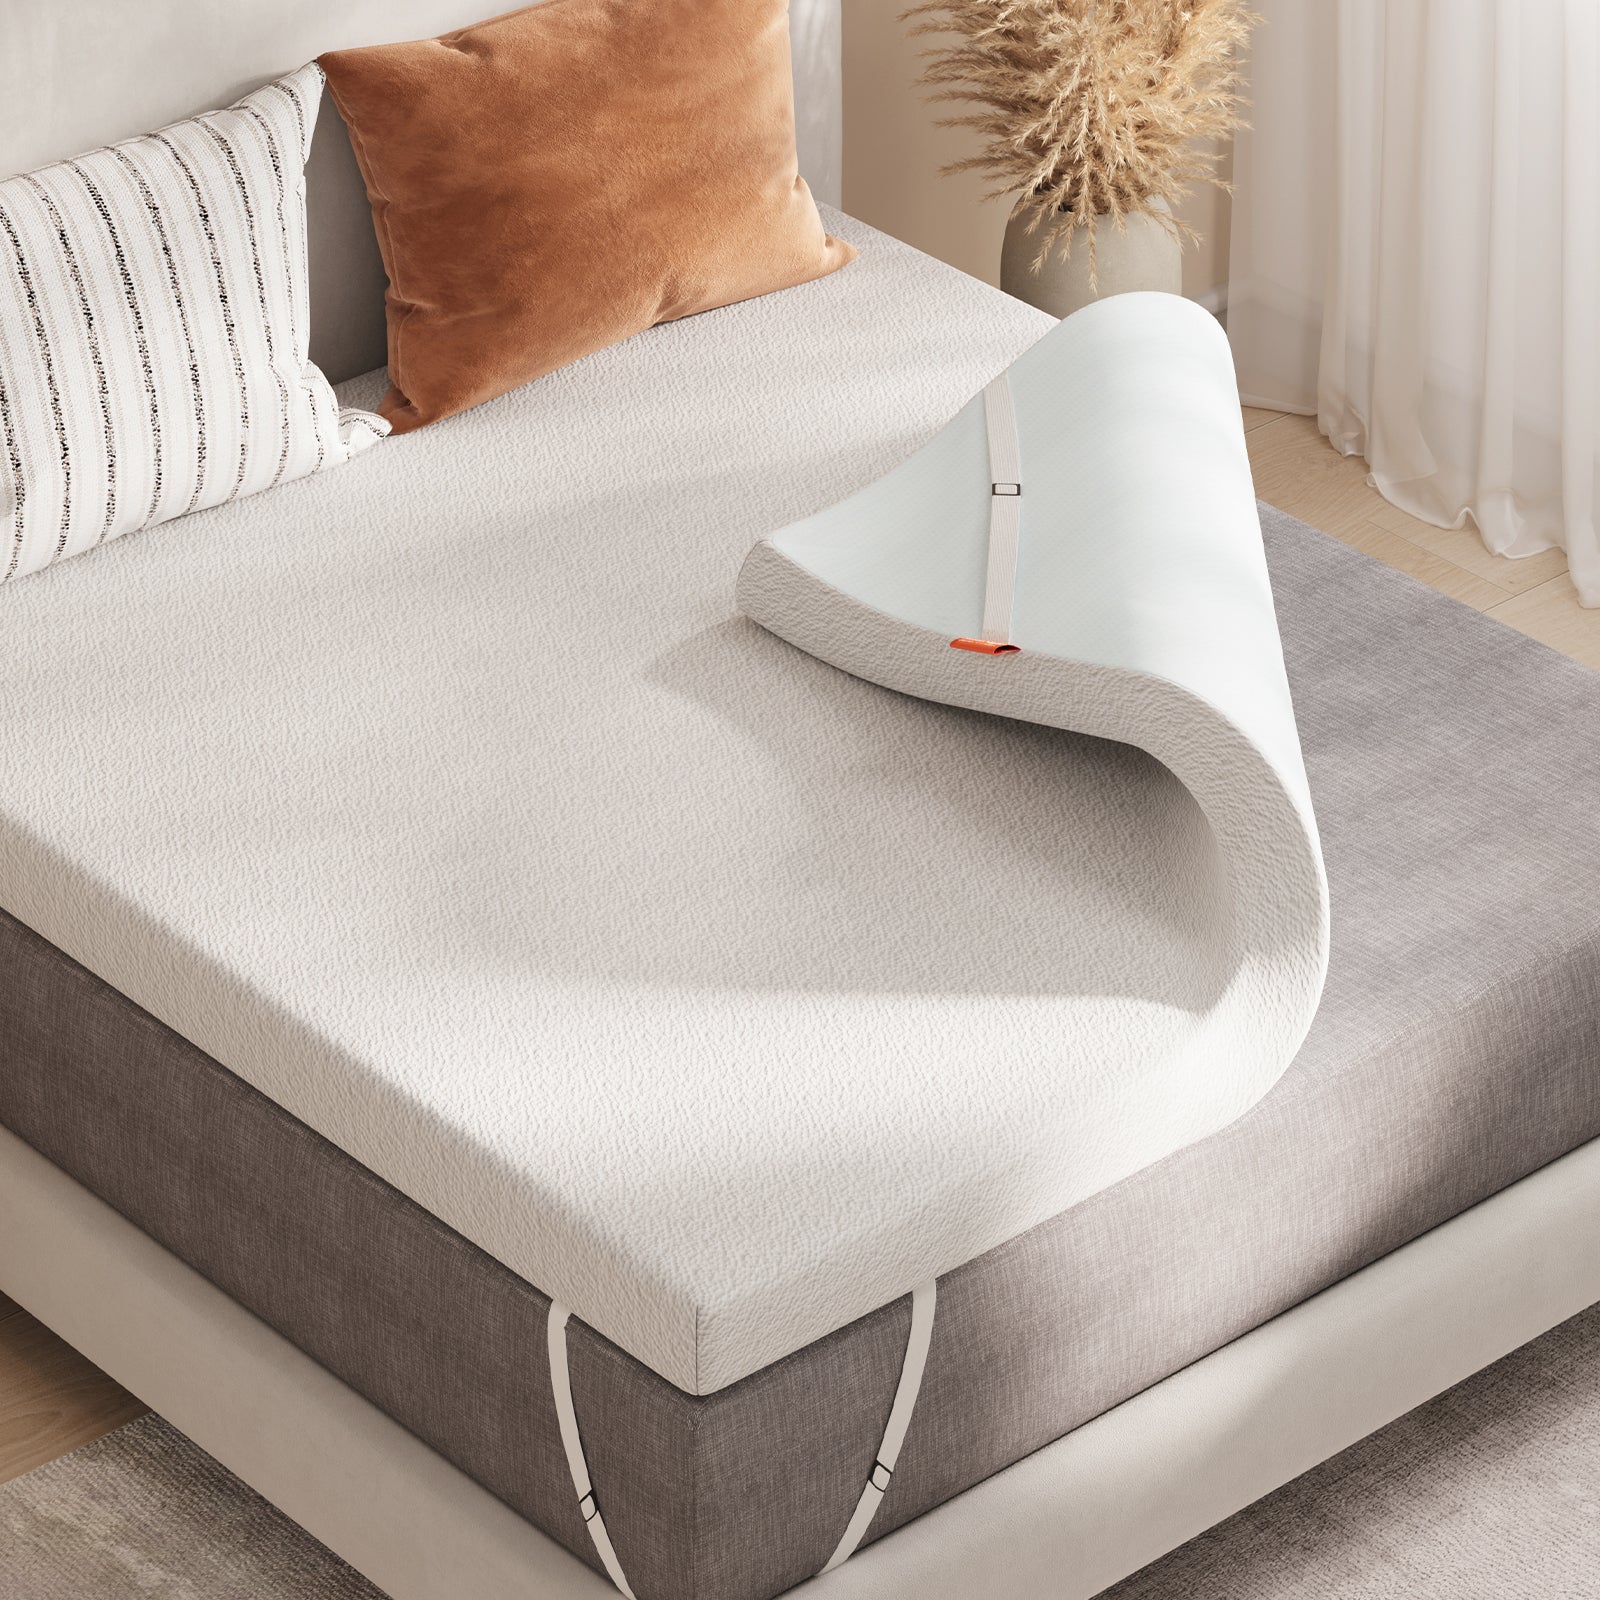 Upgrade Your Sleep with a Gel Mattress Topper